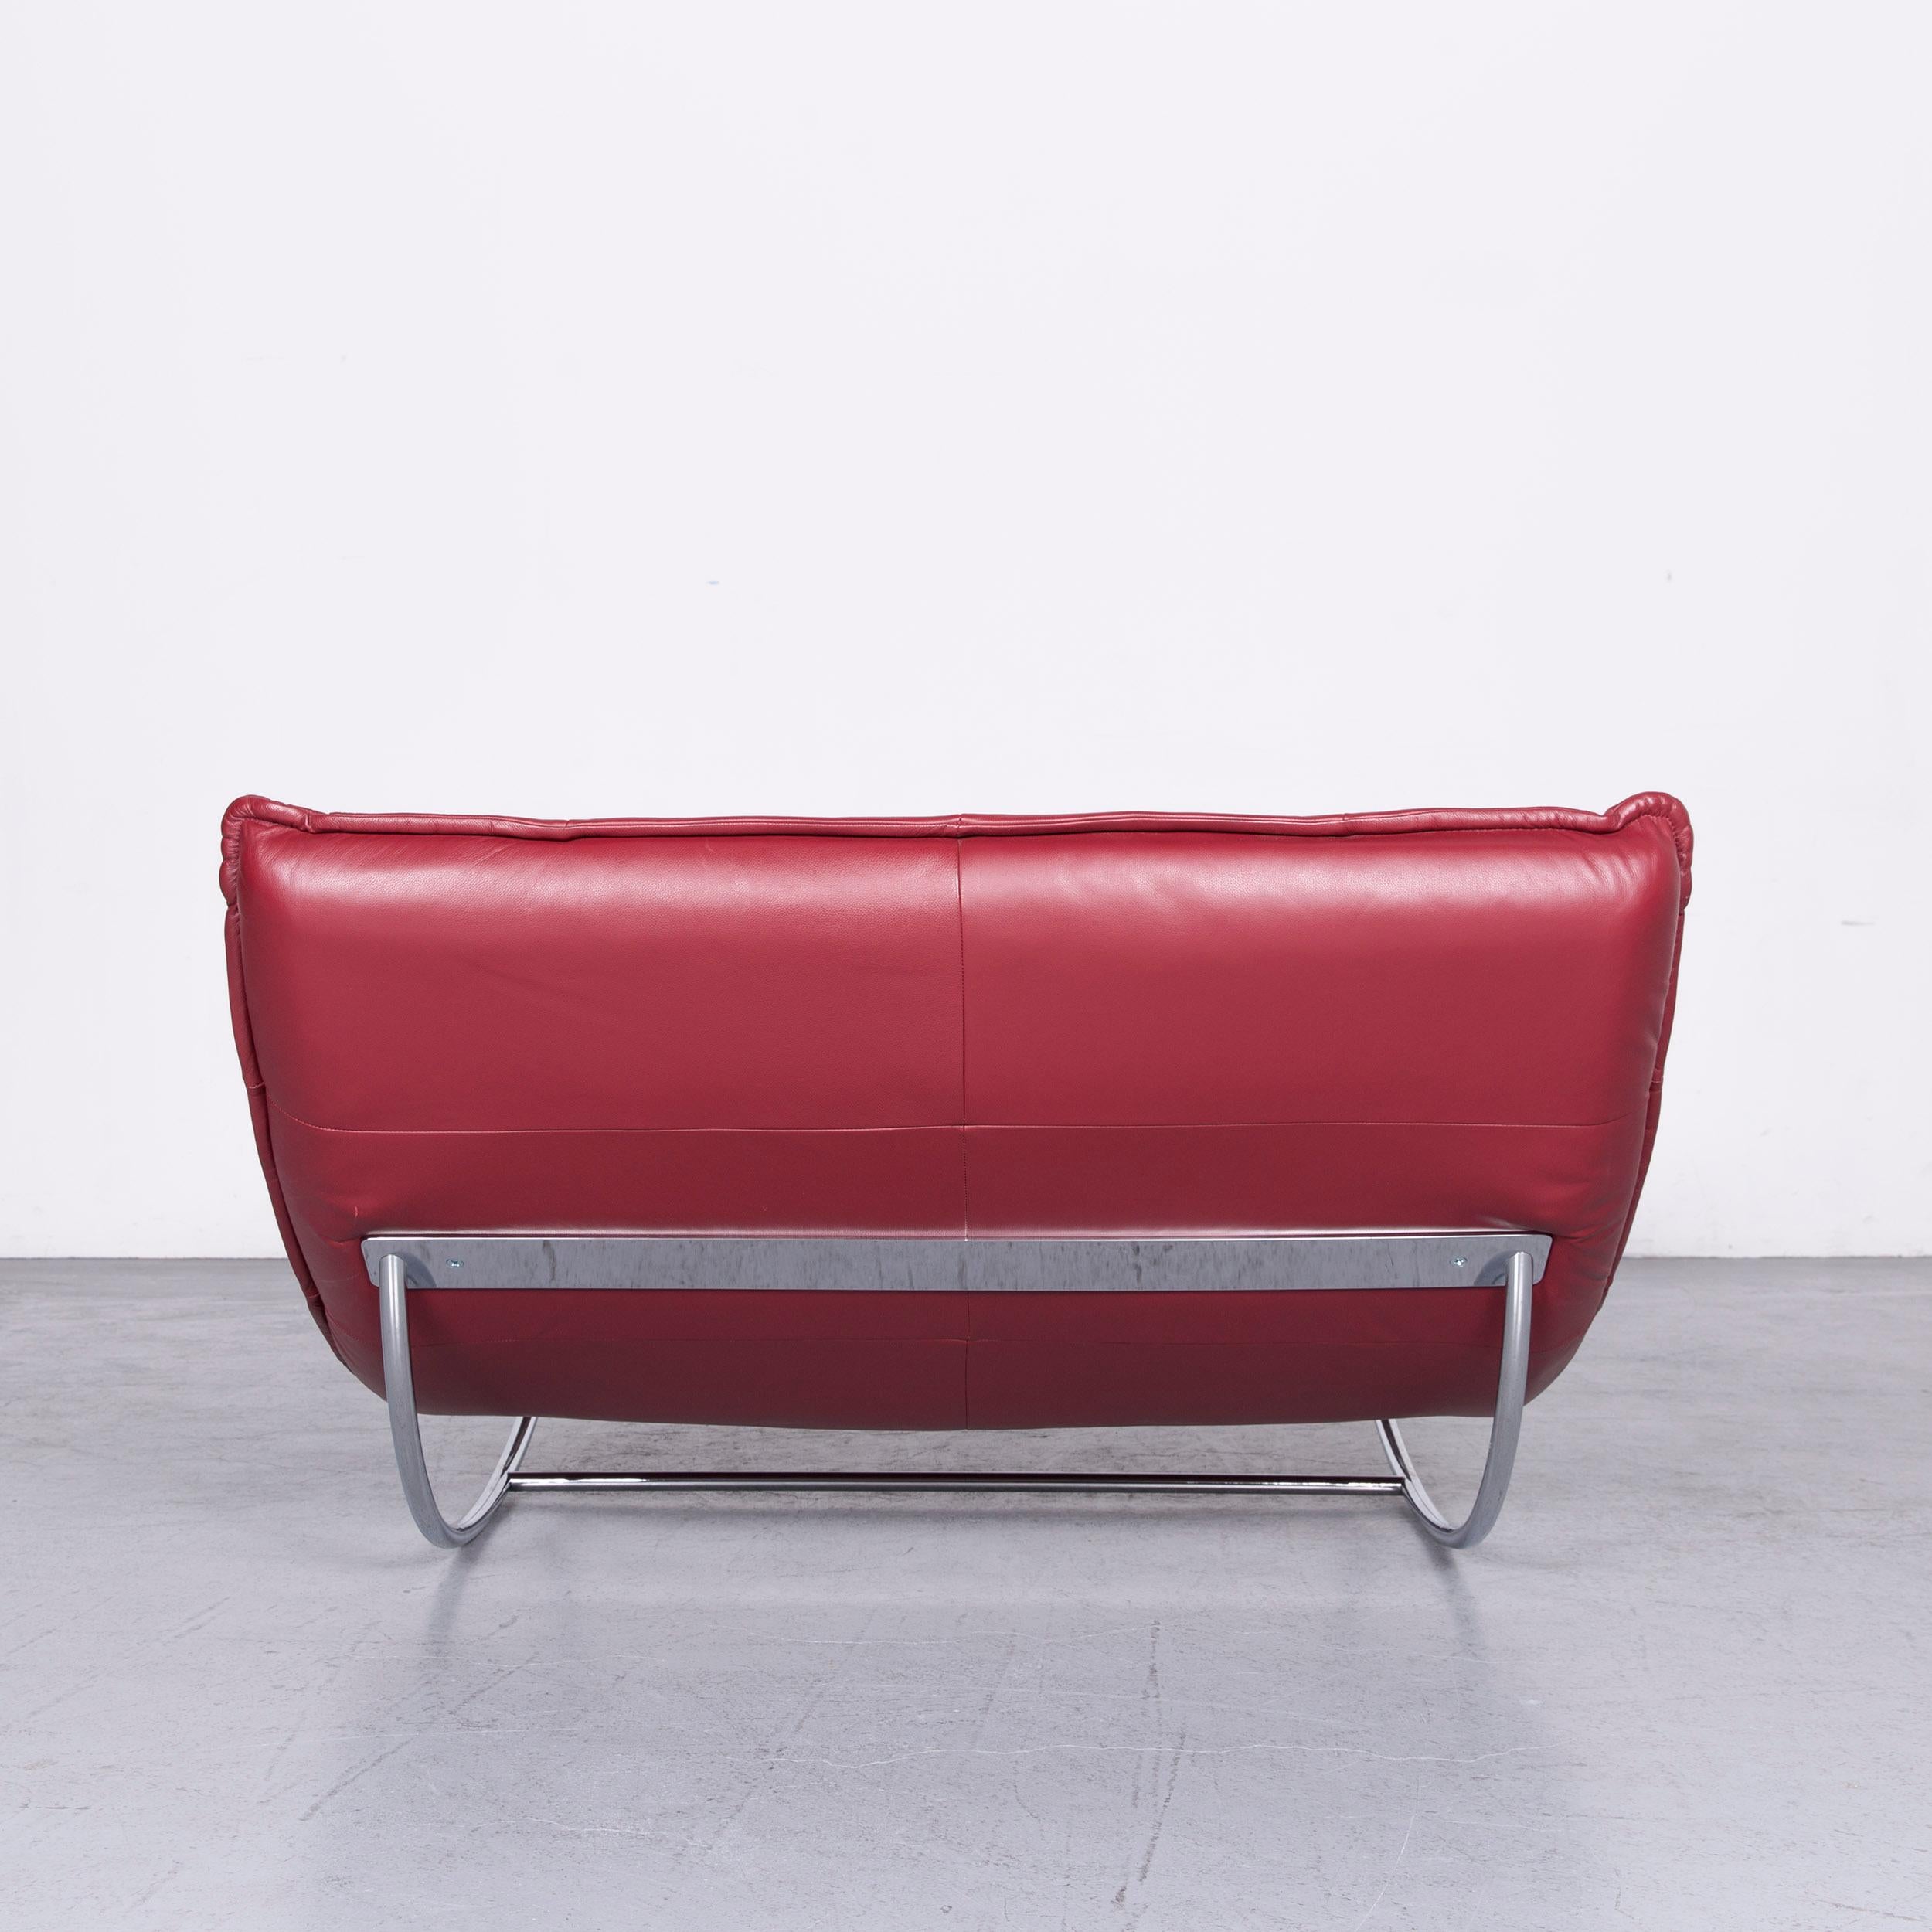 Willi Schillig Woow Designer Leather Couch in Red For Sale 4